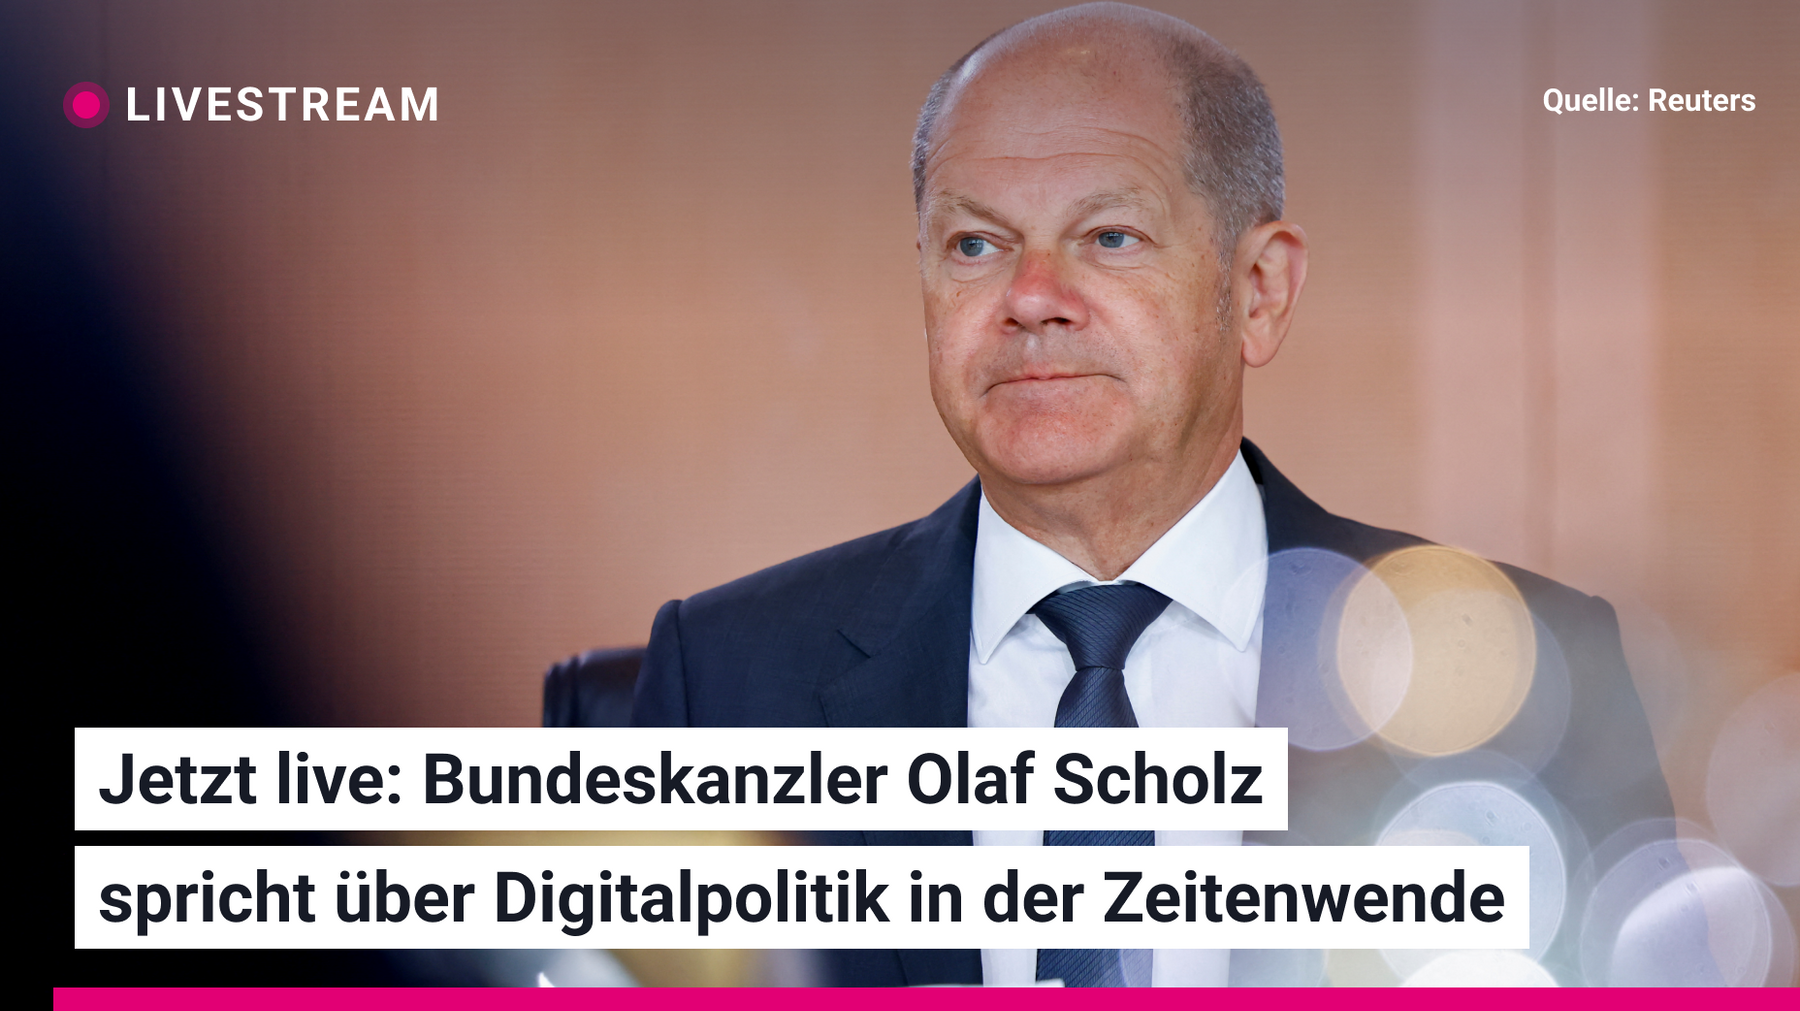 Olaf Scholz is now speaking at the Republica